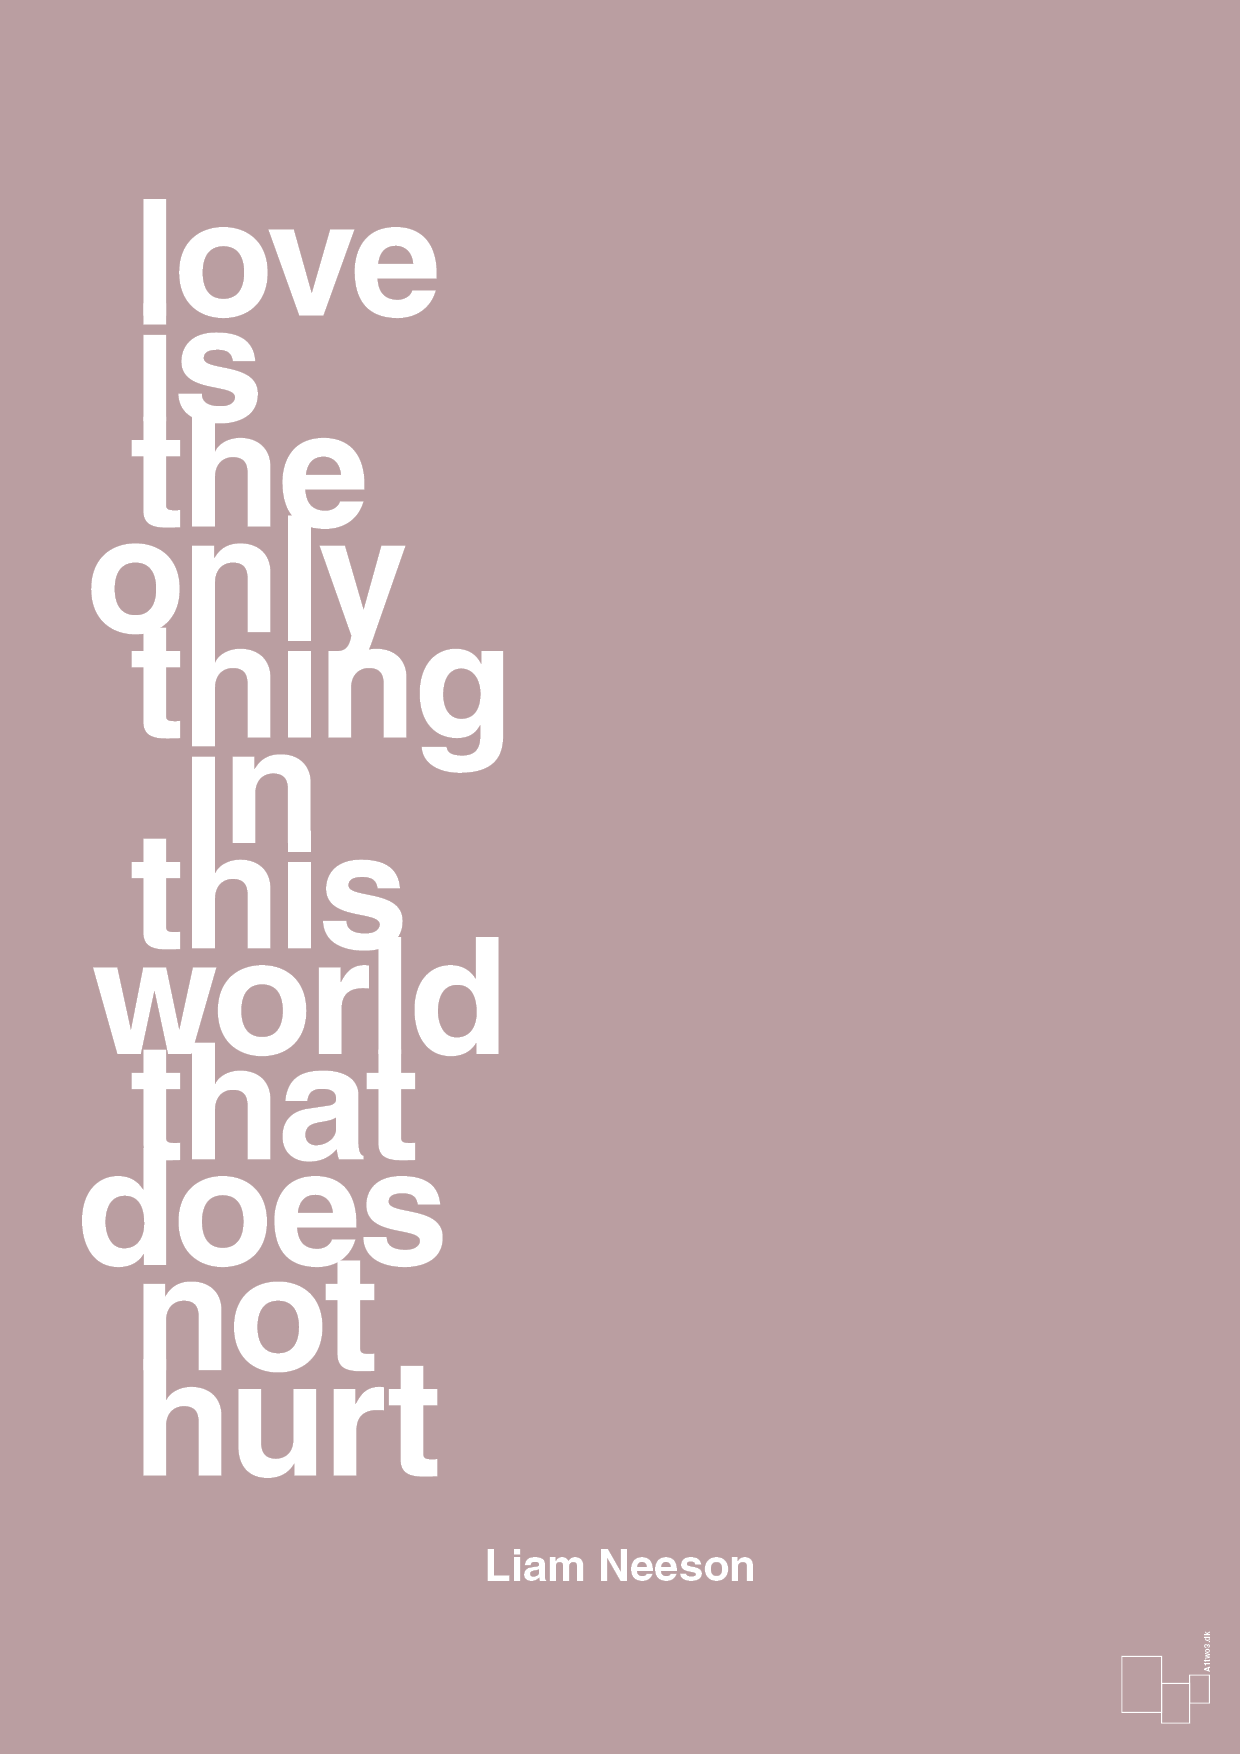 love is the only thing in this world that does not hurt - Plakat med Citater i Light Rose